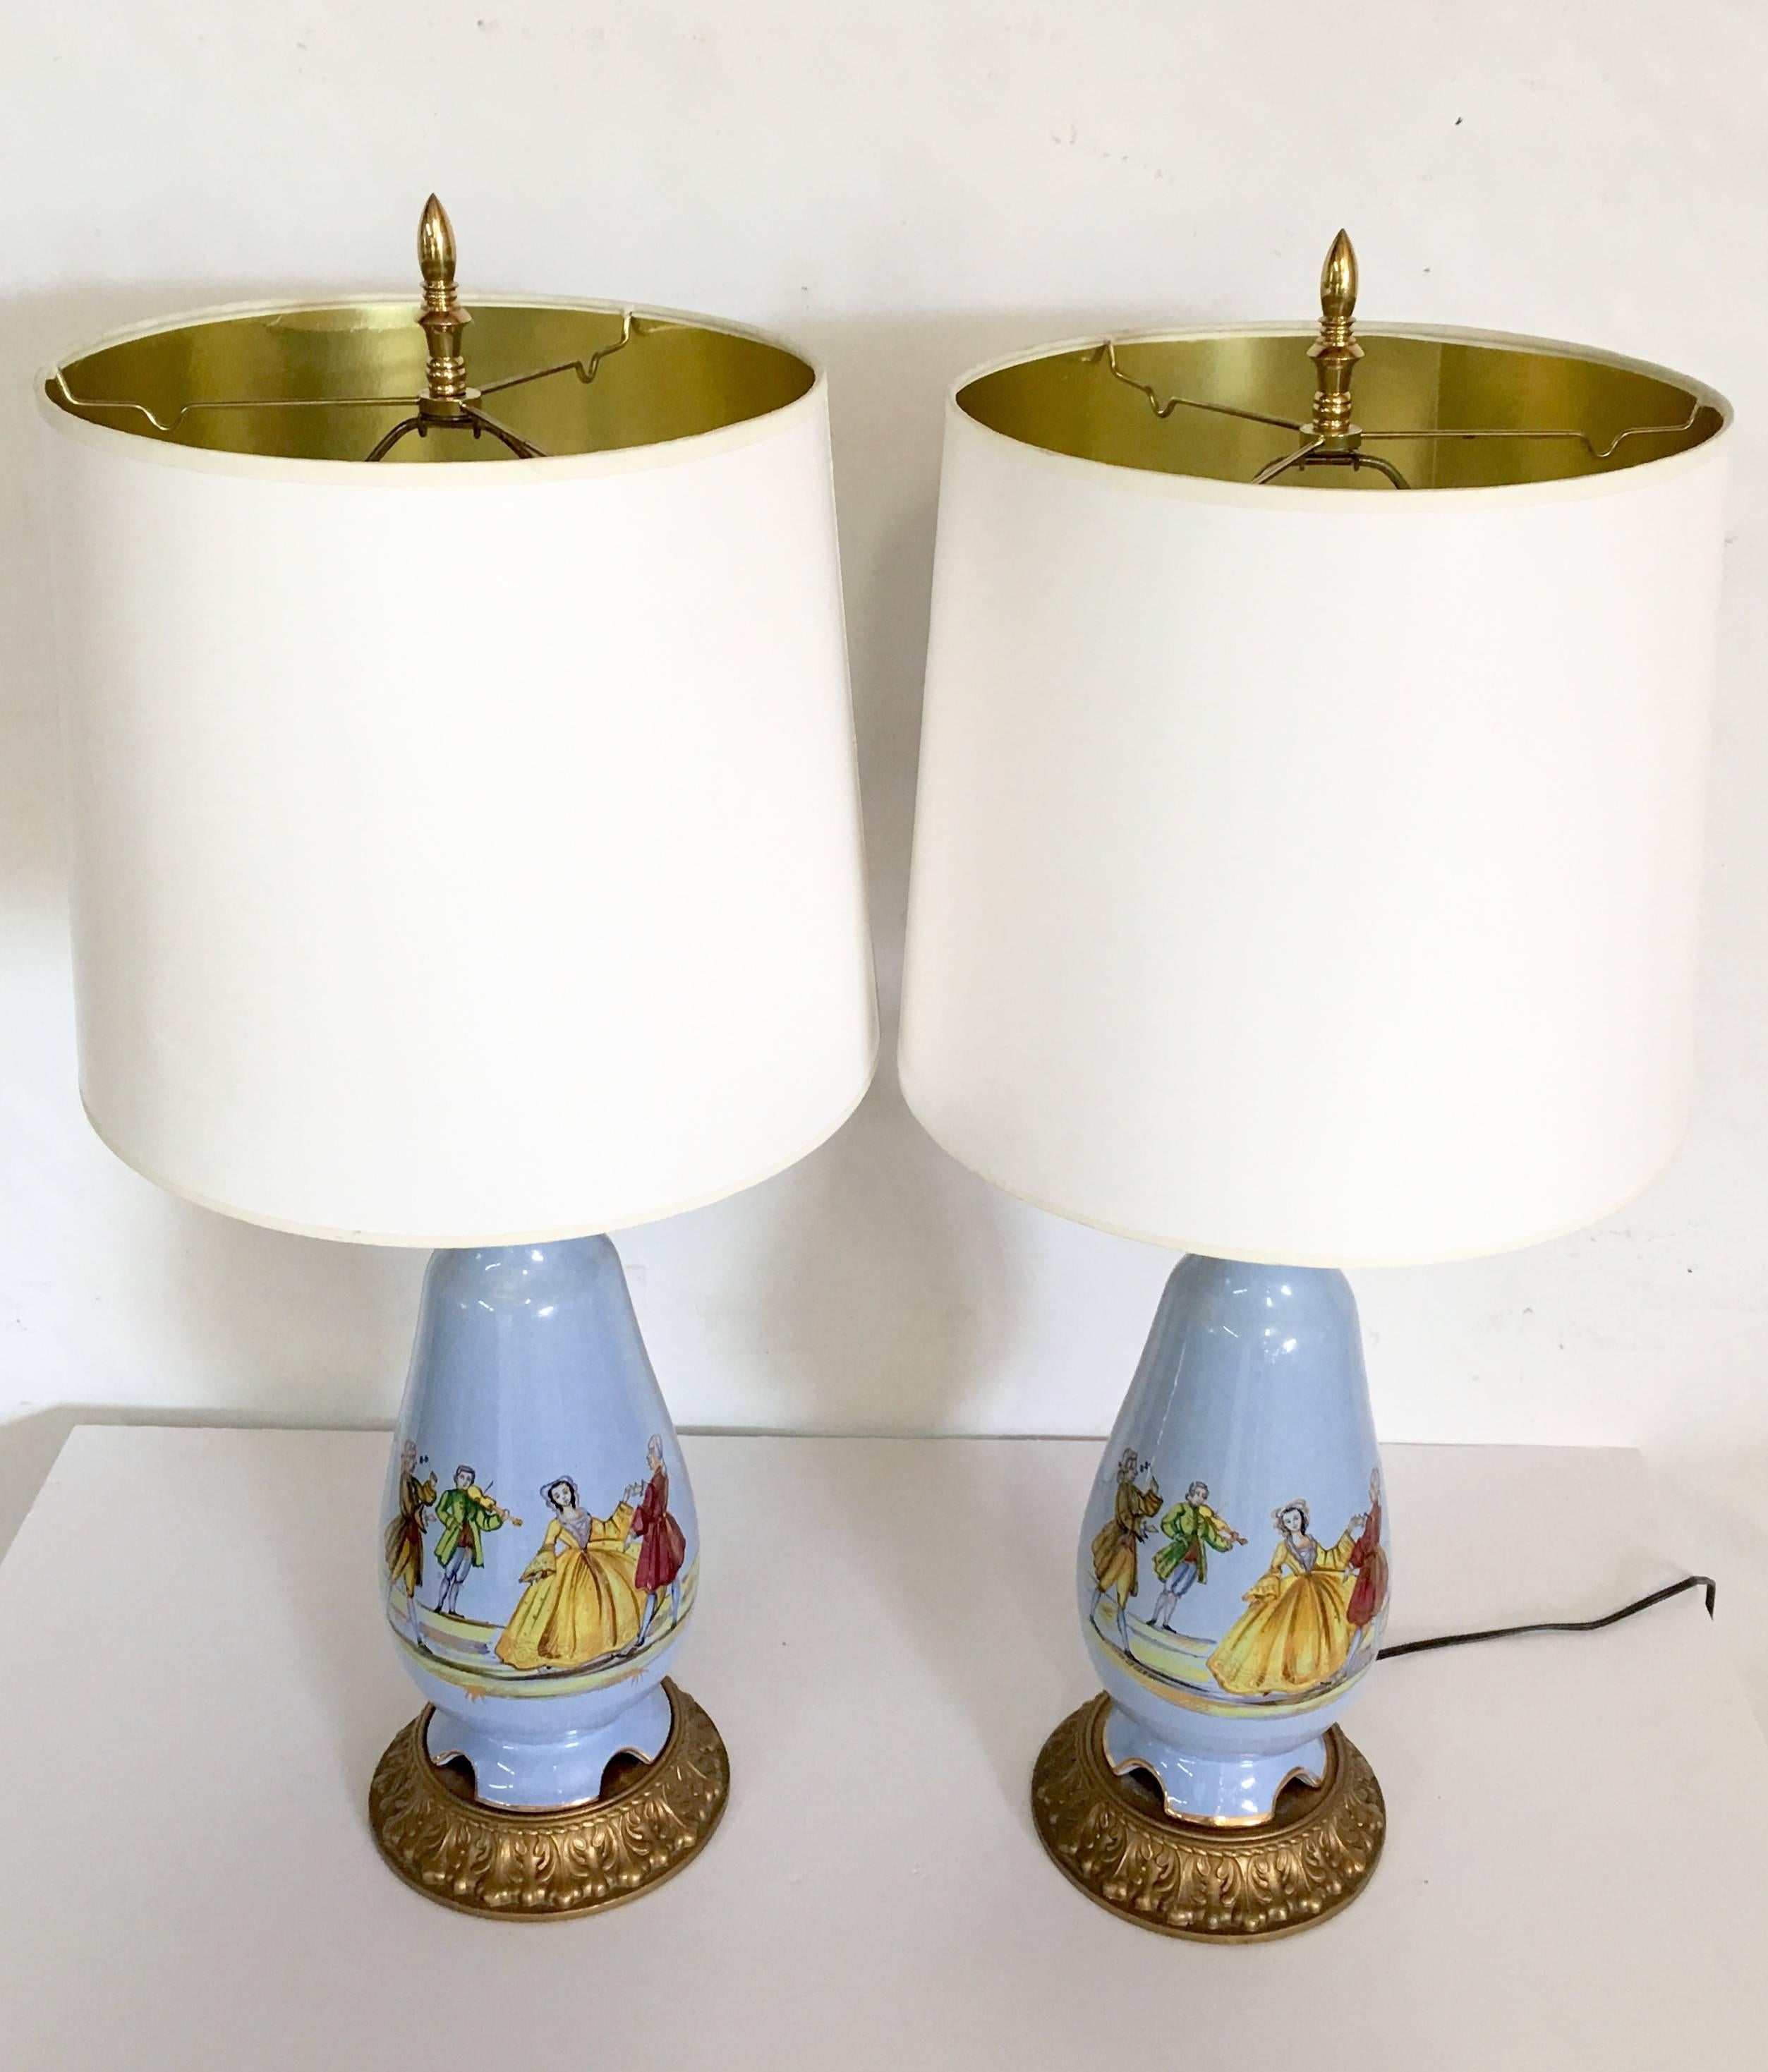 Mid-Century Pair Of Whimsical & Unique French Blue Porcelain Decalcomania Table Lamps. Features a 17th Century courting couple dancing to French court musicians.
Mounted on original gold gilt bronze bases with gold bronze ribbed necks. Includes